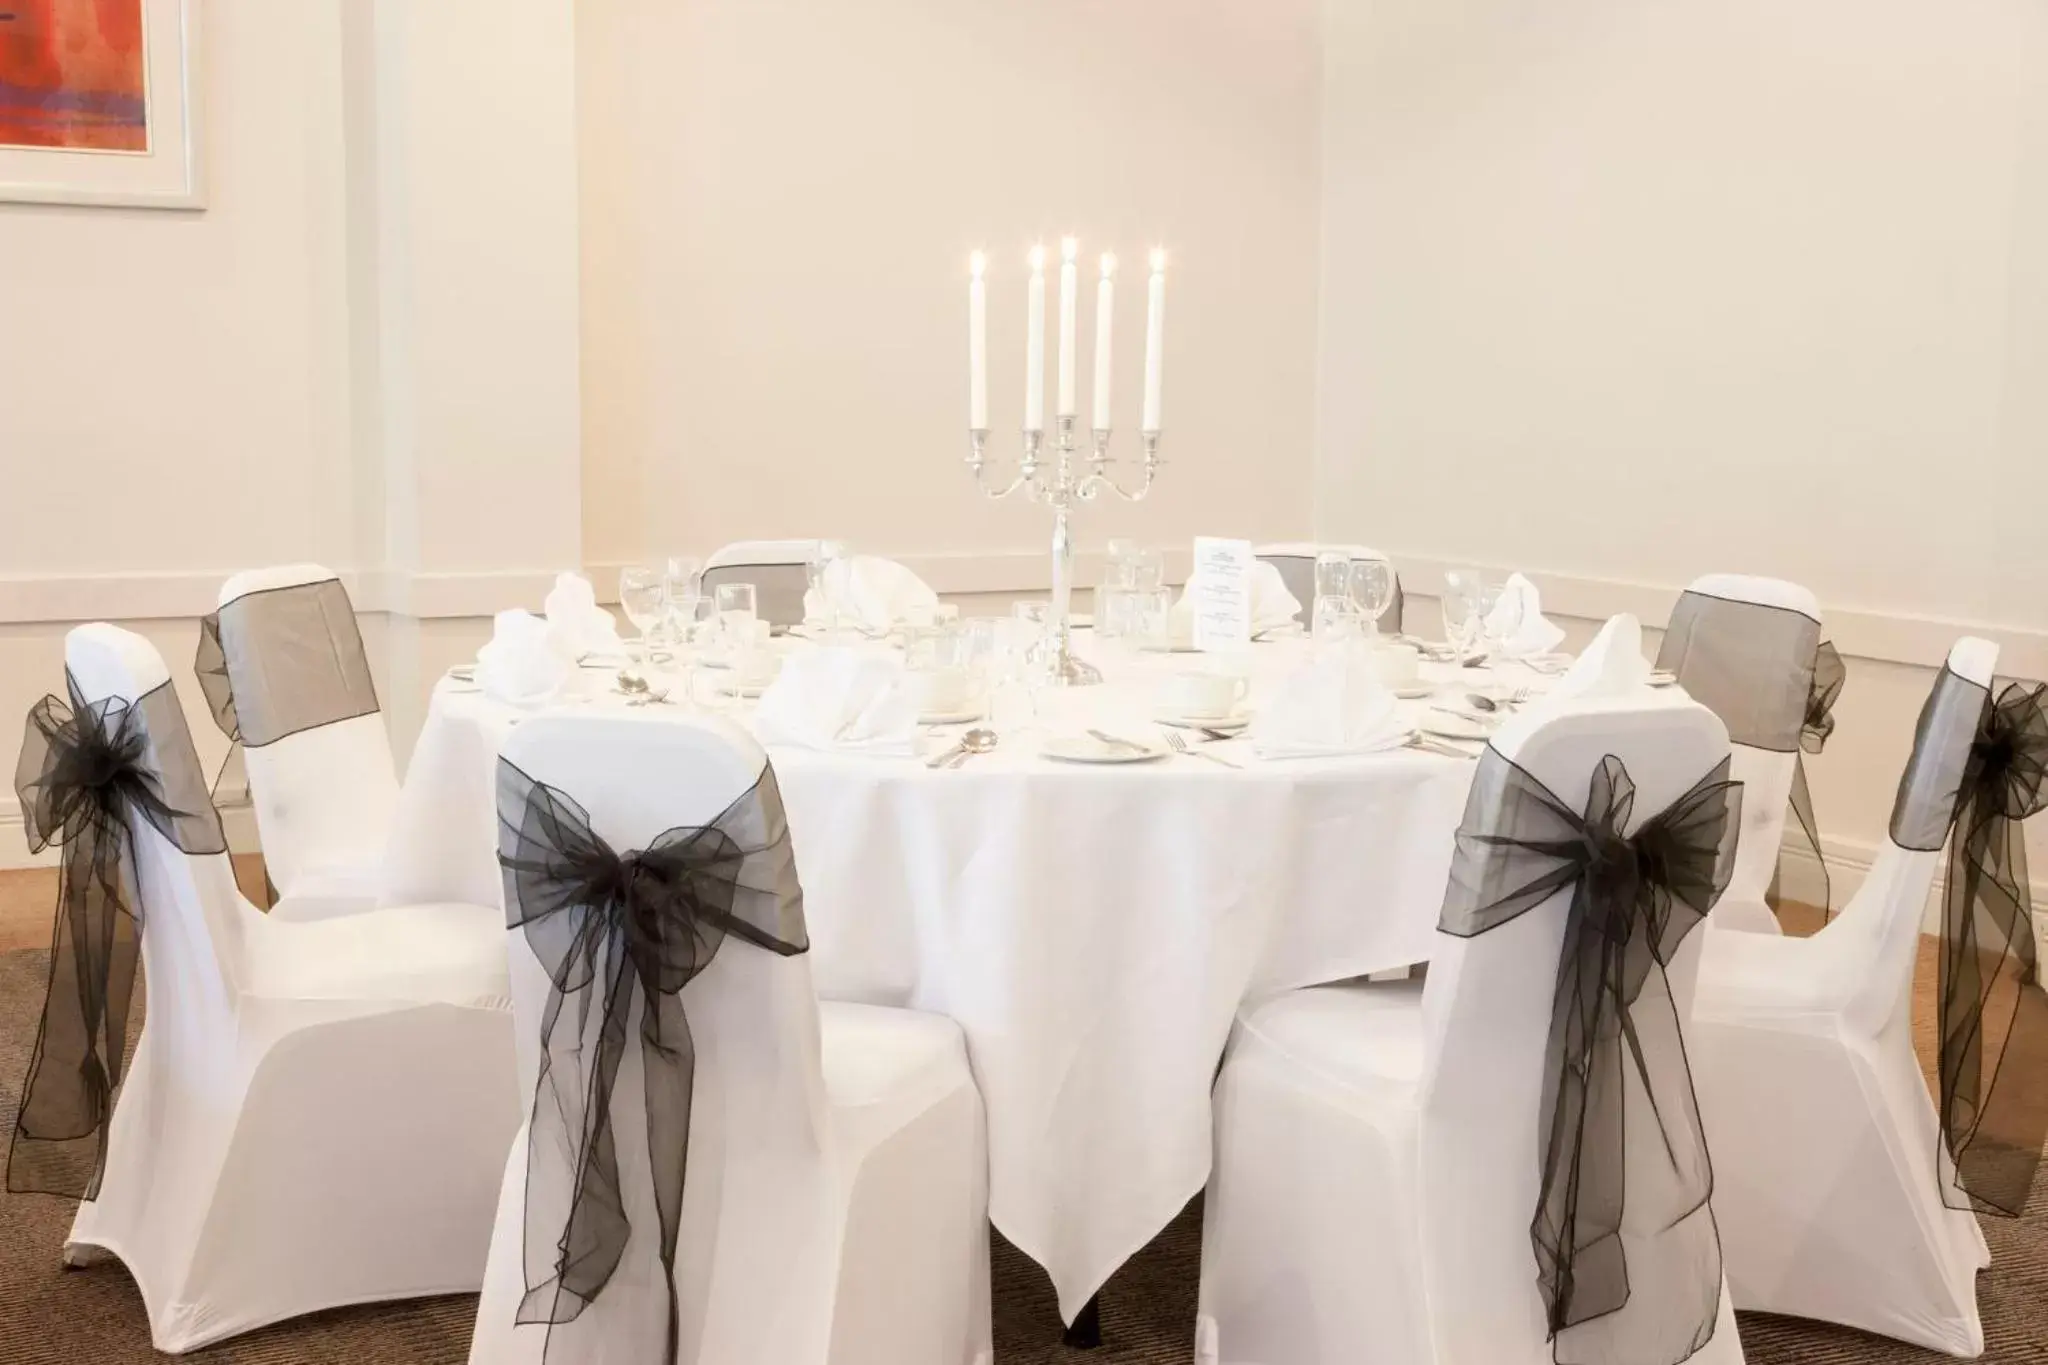 Banquet/Function facilities, Banquet Facilities in Holiday Inn Leeds Brighouse, an IHG Hotel